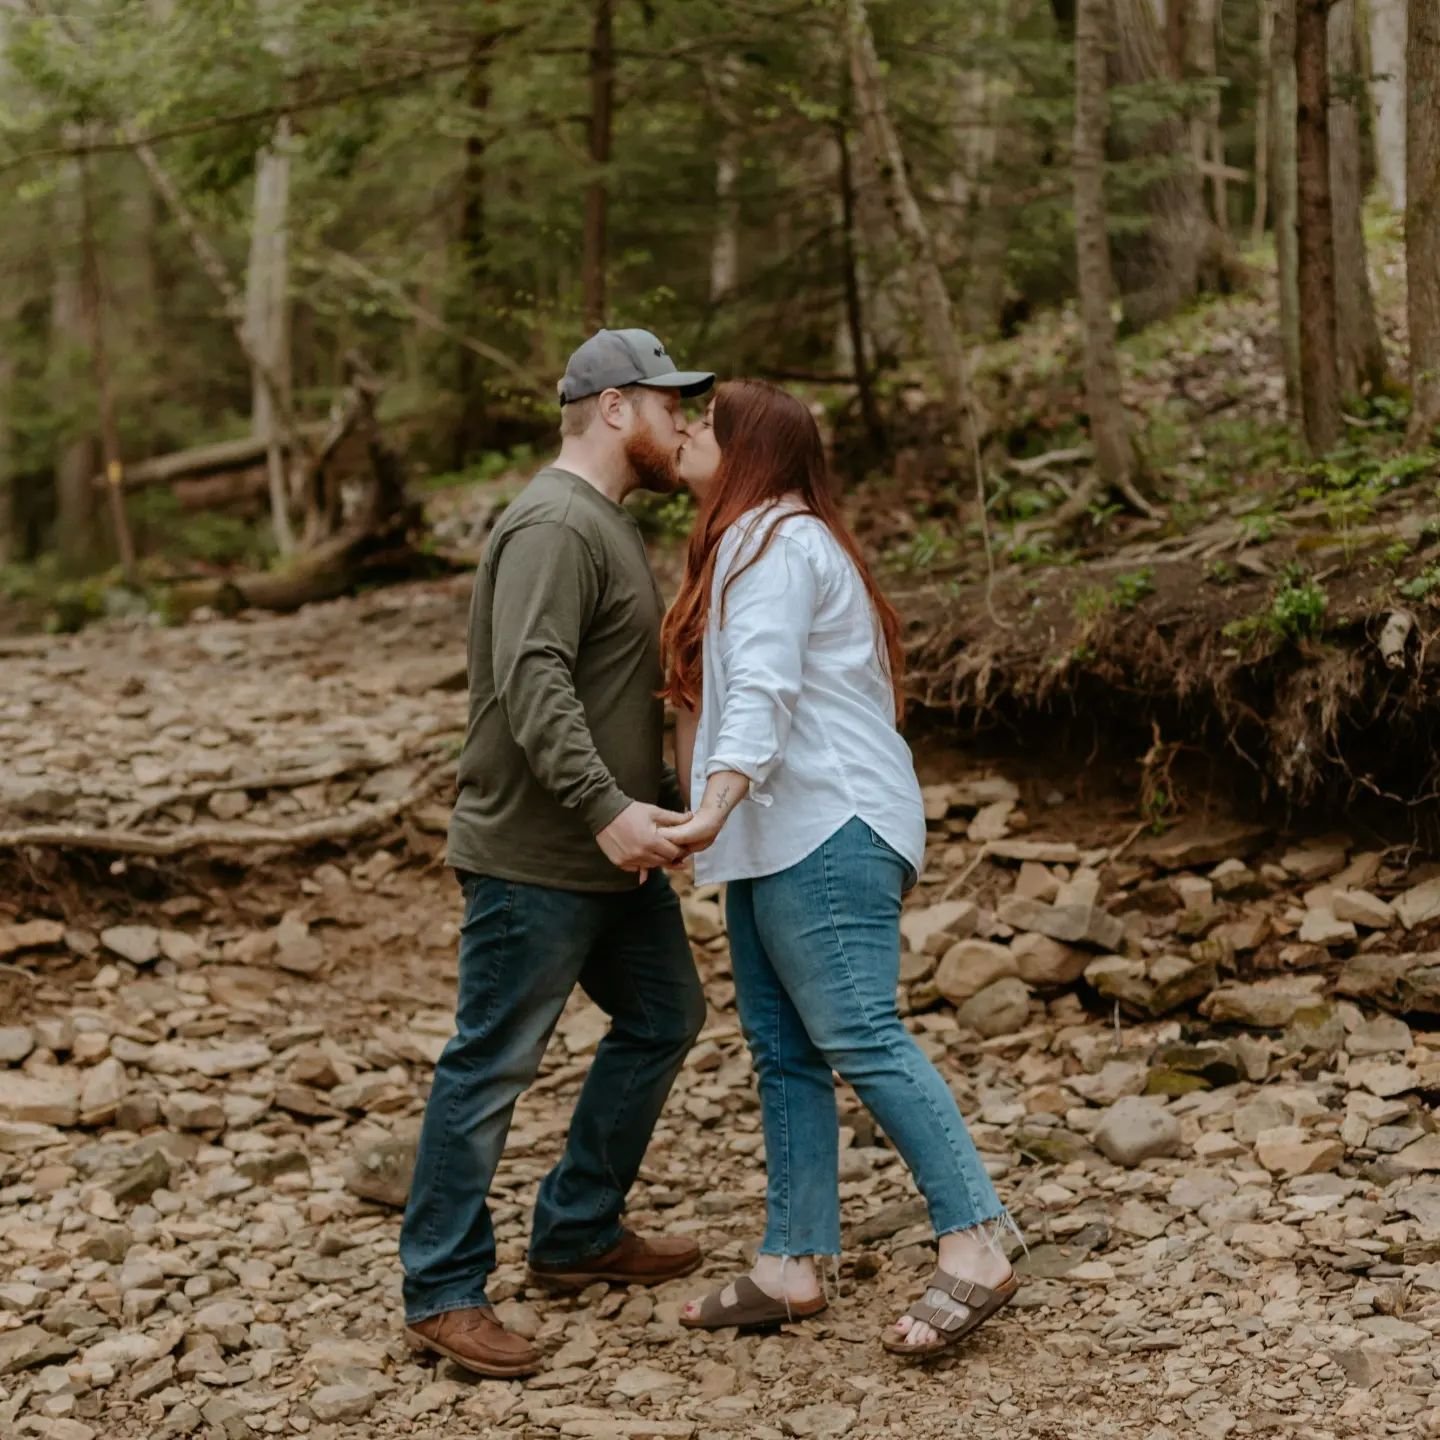 Couples...here's your sign to book a maternity session with us!⁠
⁠
Bailey&amp;Matt absolutely crushed their maternity session at McConnell's Mills...like wow, these two!!⁠ We couldn't have asked for a better way to spend a warm spring evening.
⁠
Thou